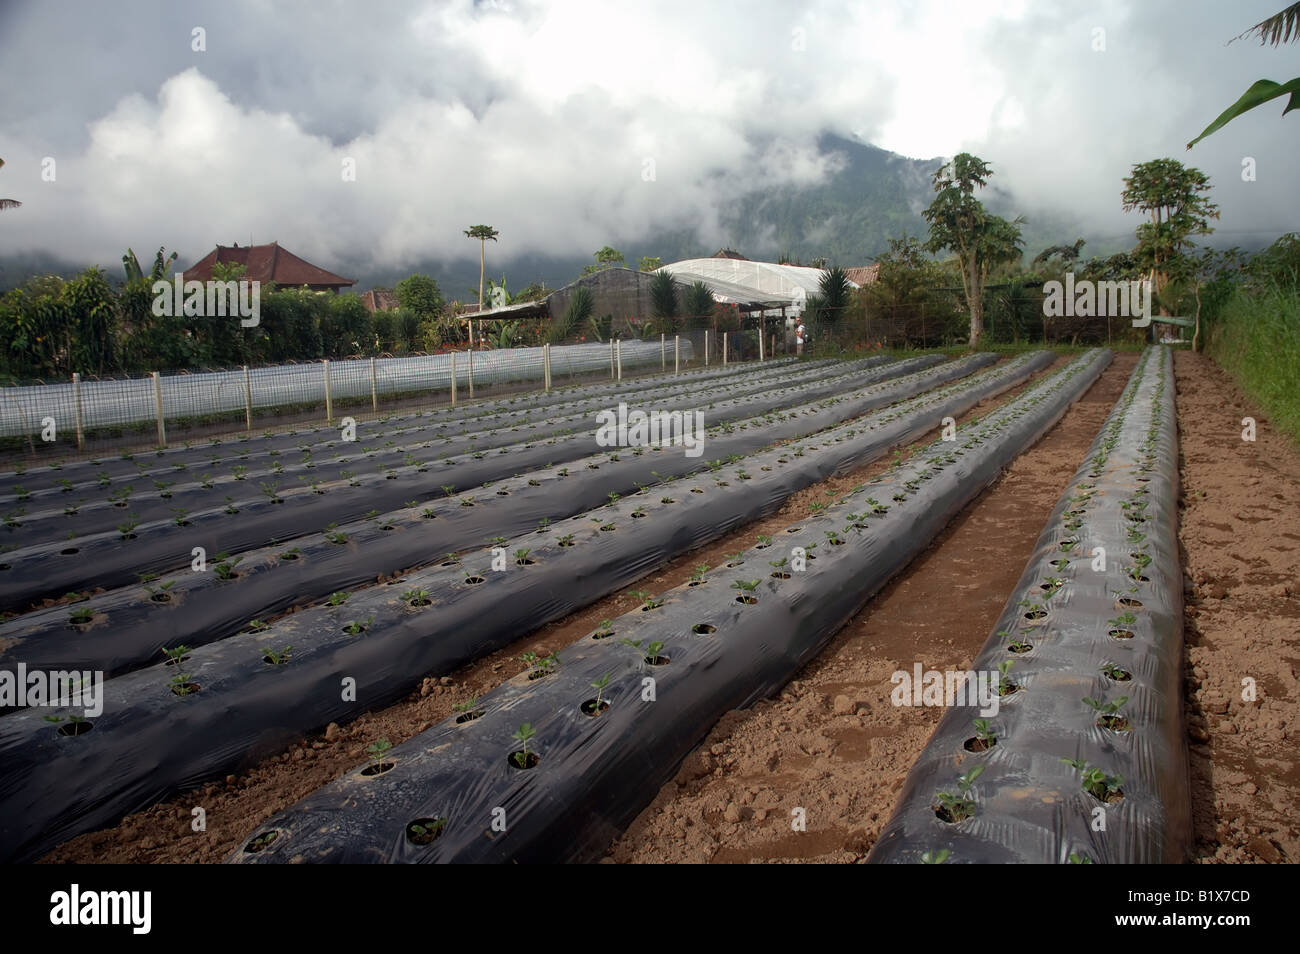 Young strawberry plants growing in fertile highland fields of Bedugul, Bali, Indonesia Stock Photo